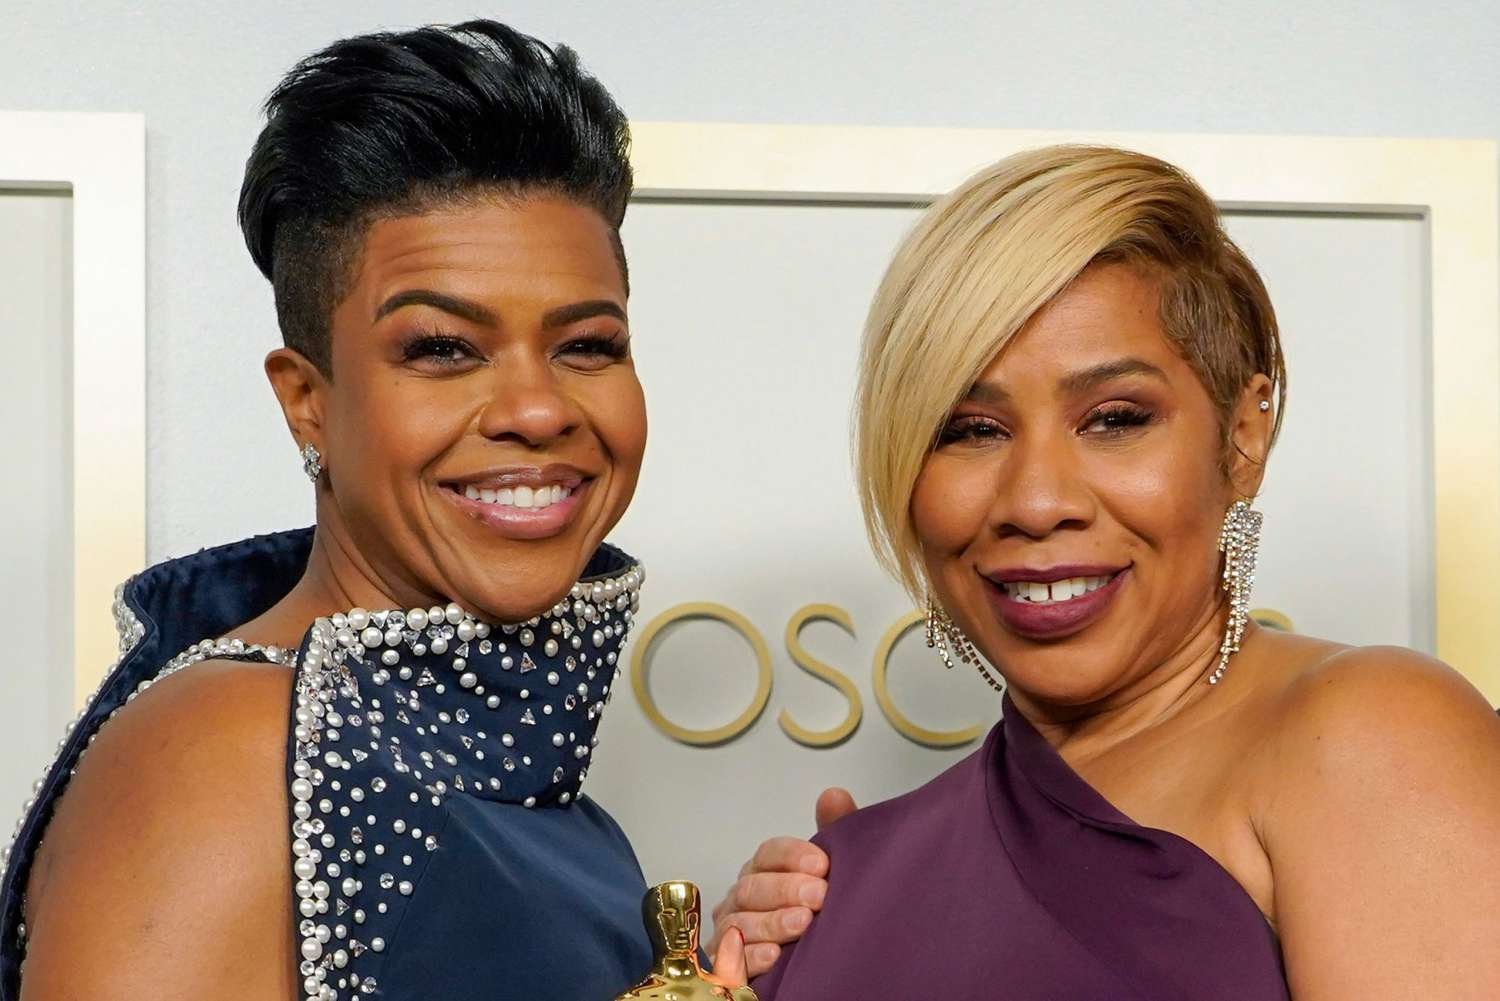 Mia Neal and Jamika Wilson Are the First Black Women to Win an Oscar for Hair and Makeup